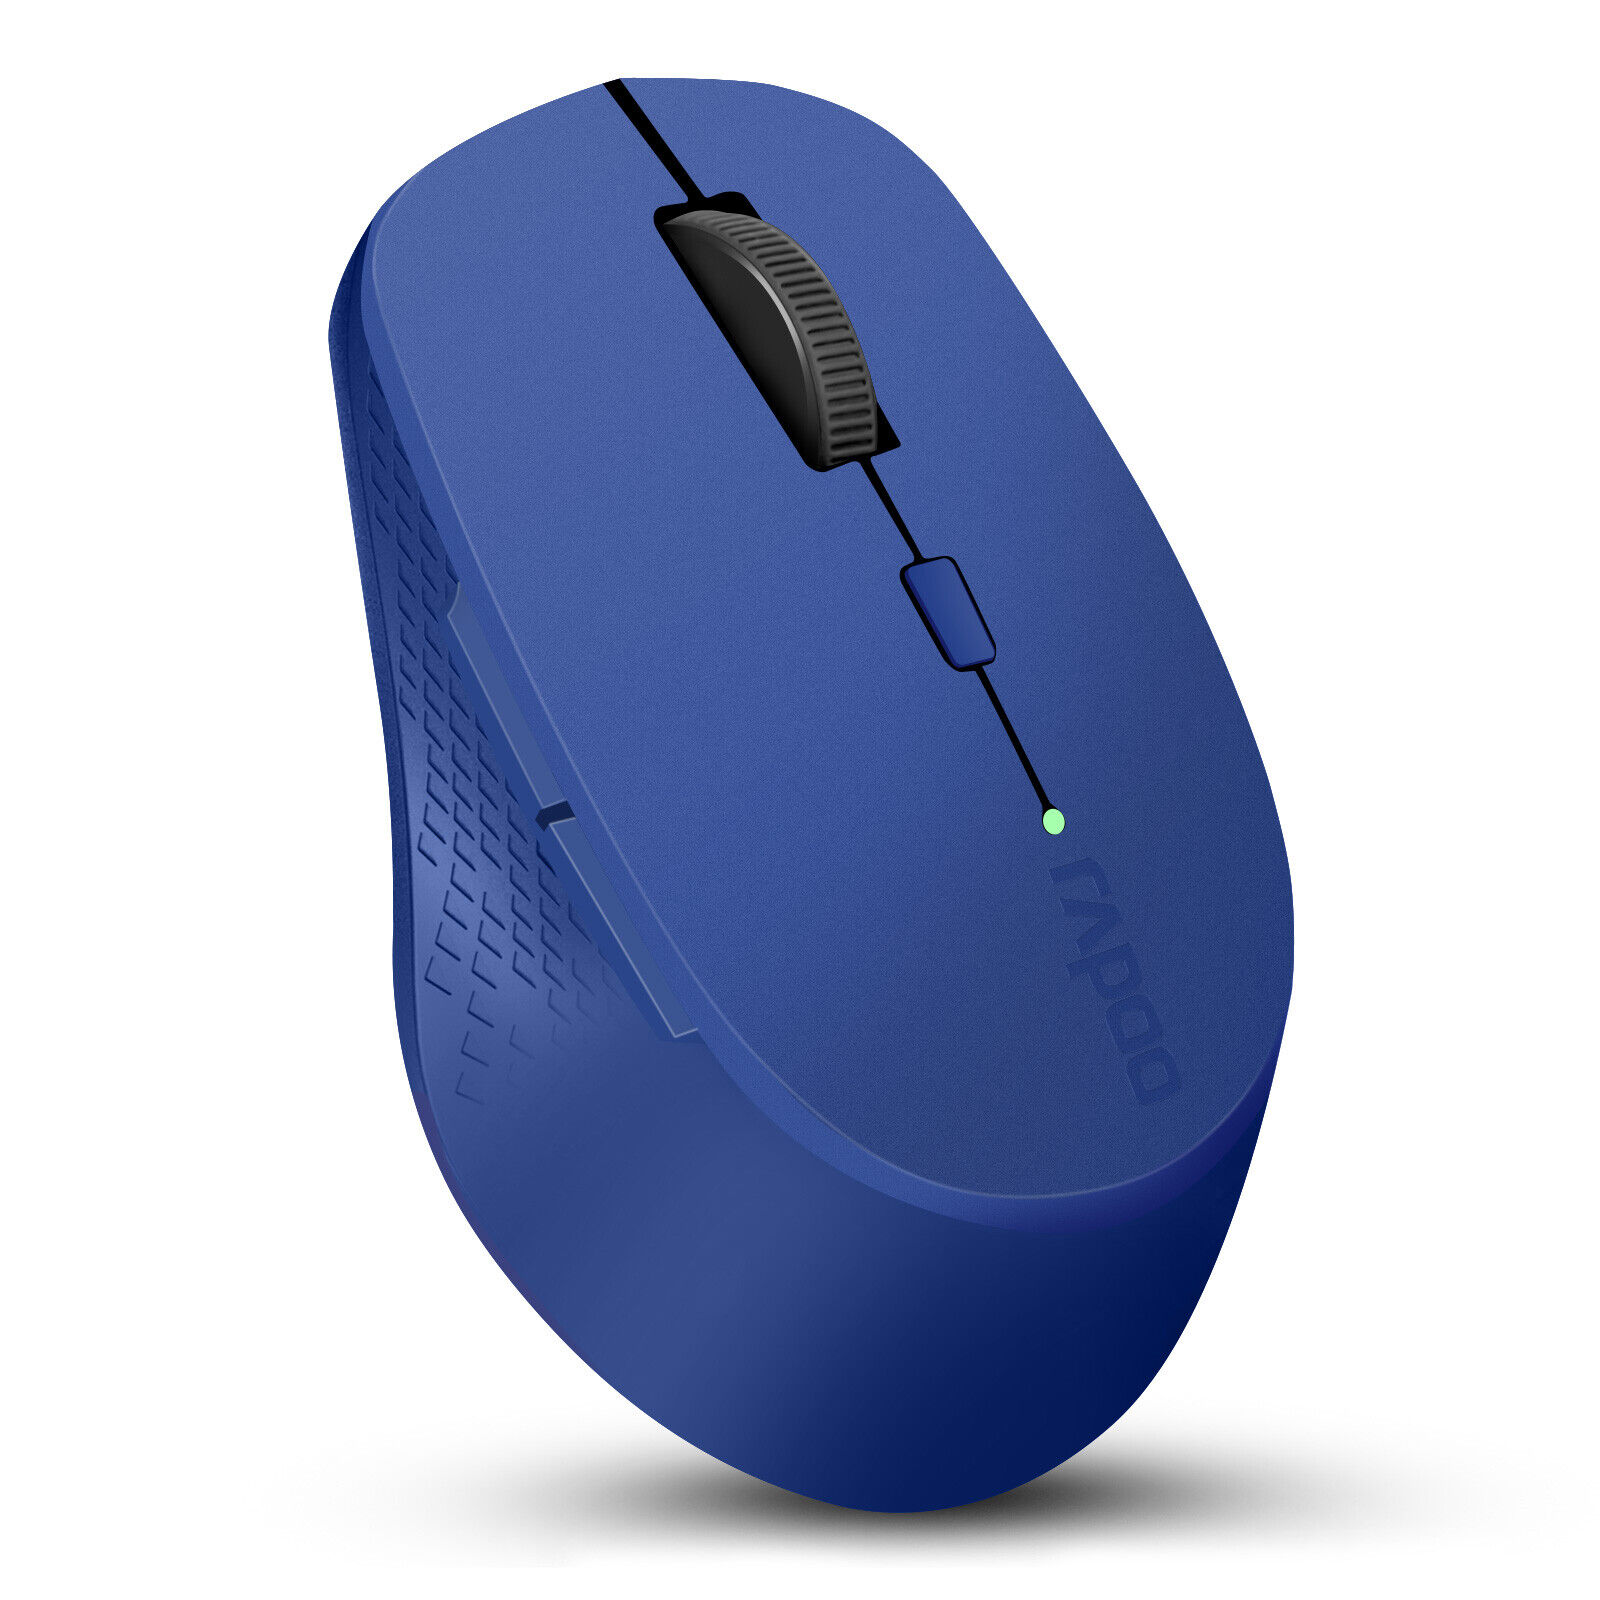 RAPOO M300 Silent Wireless Bluetooth Mouse, Multi-Device, 1600 DPI for Laptop PC